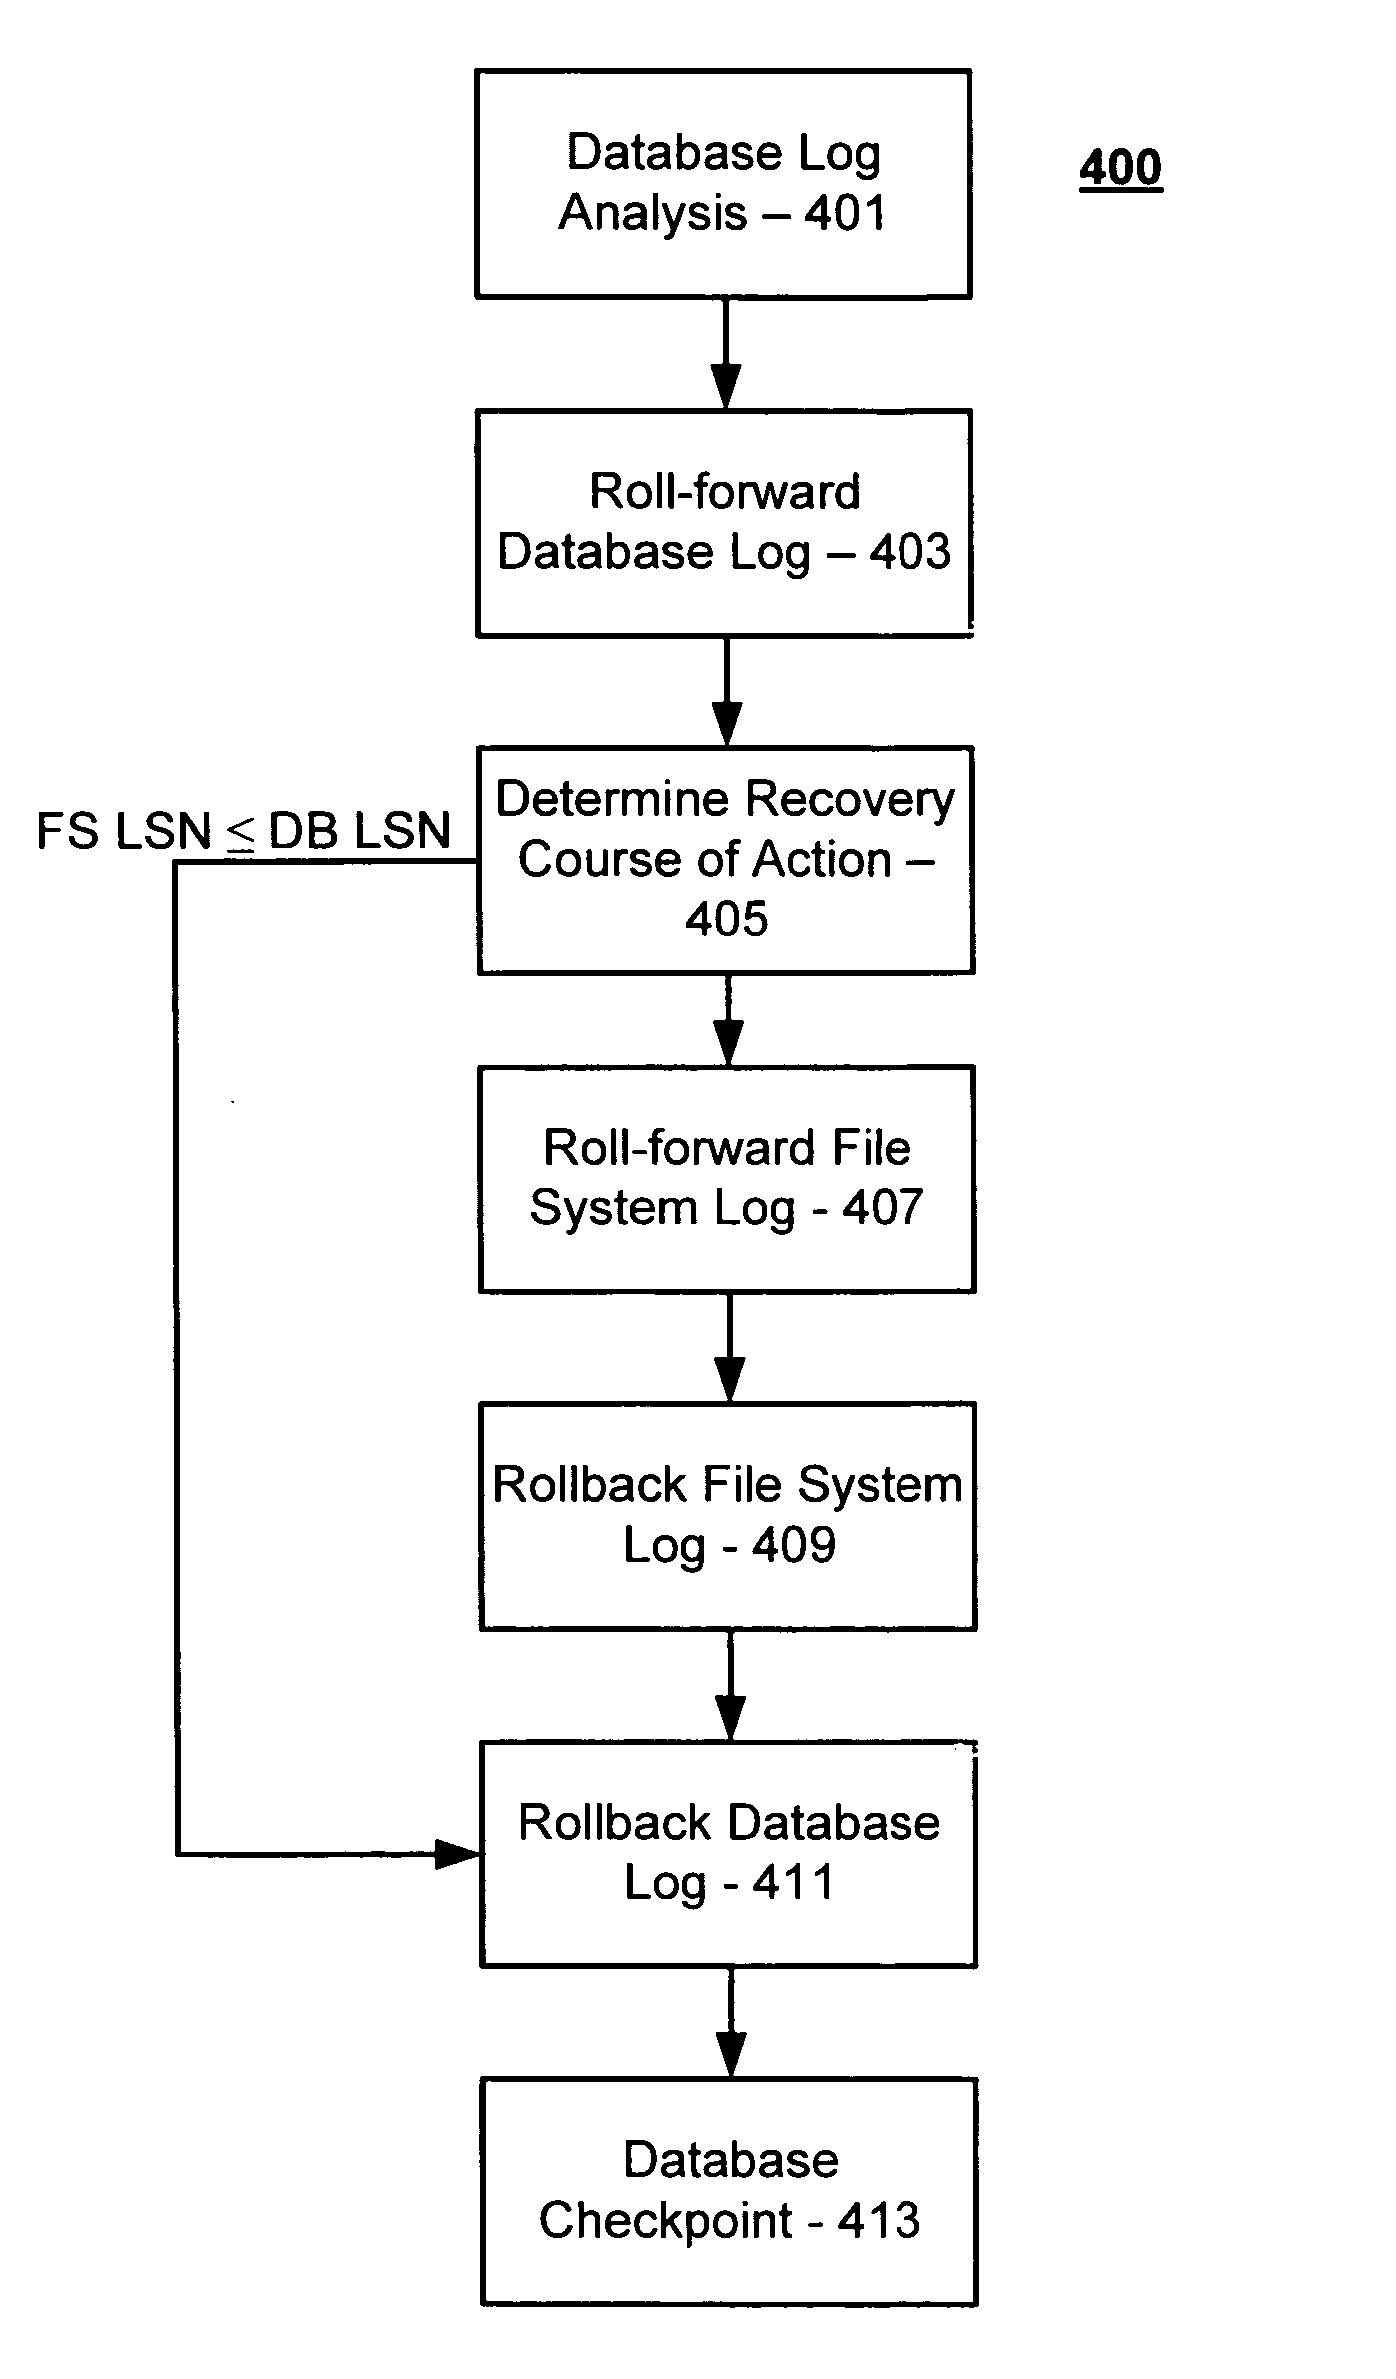 Maintenance of link level consistency between database and file system